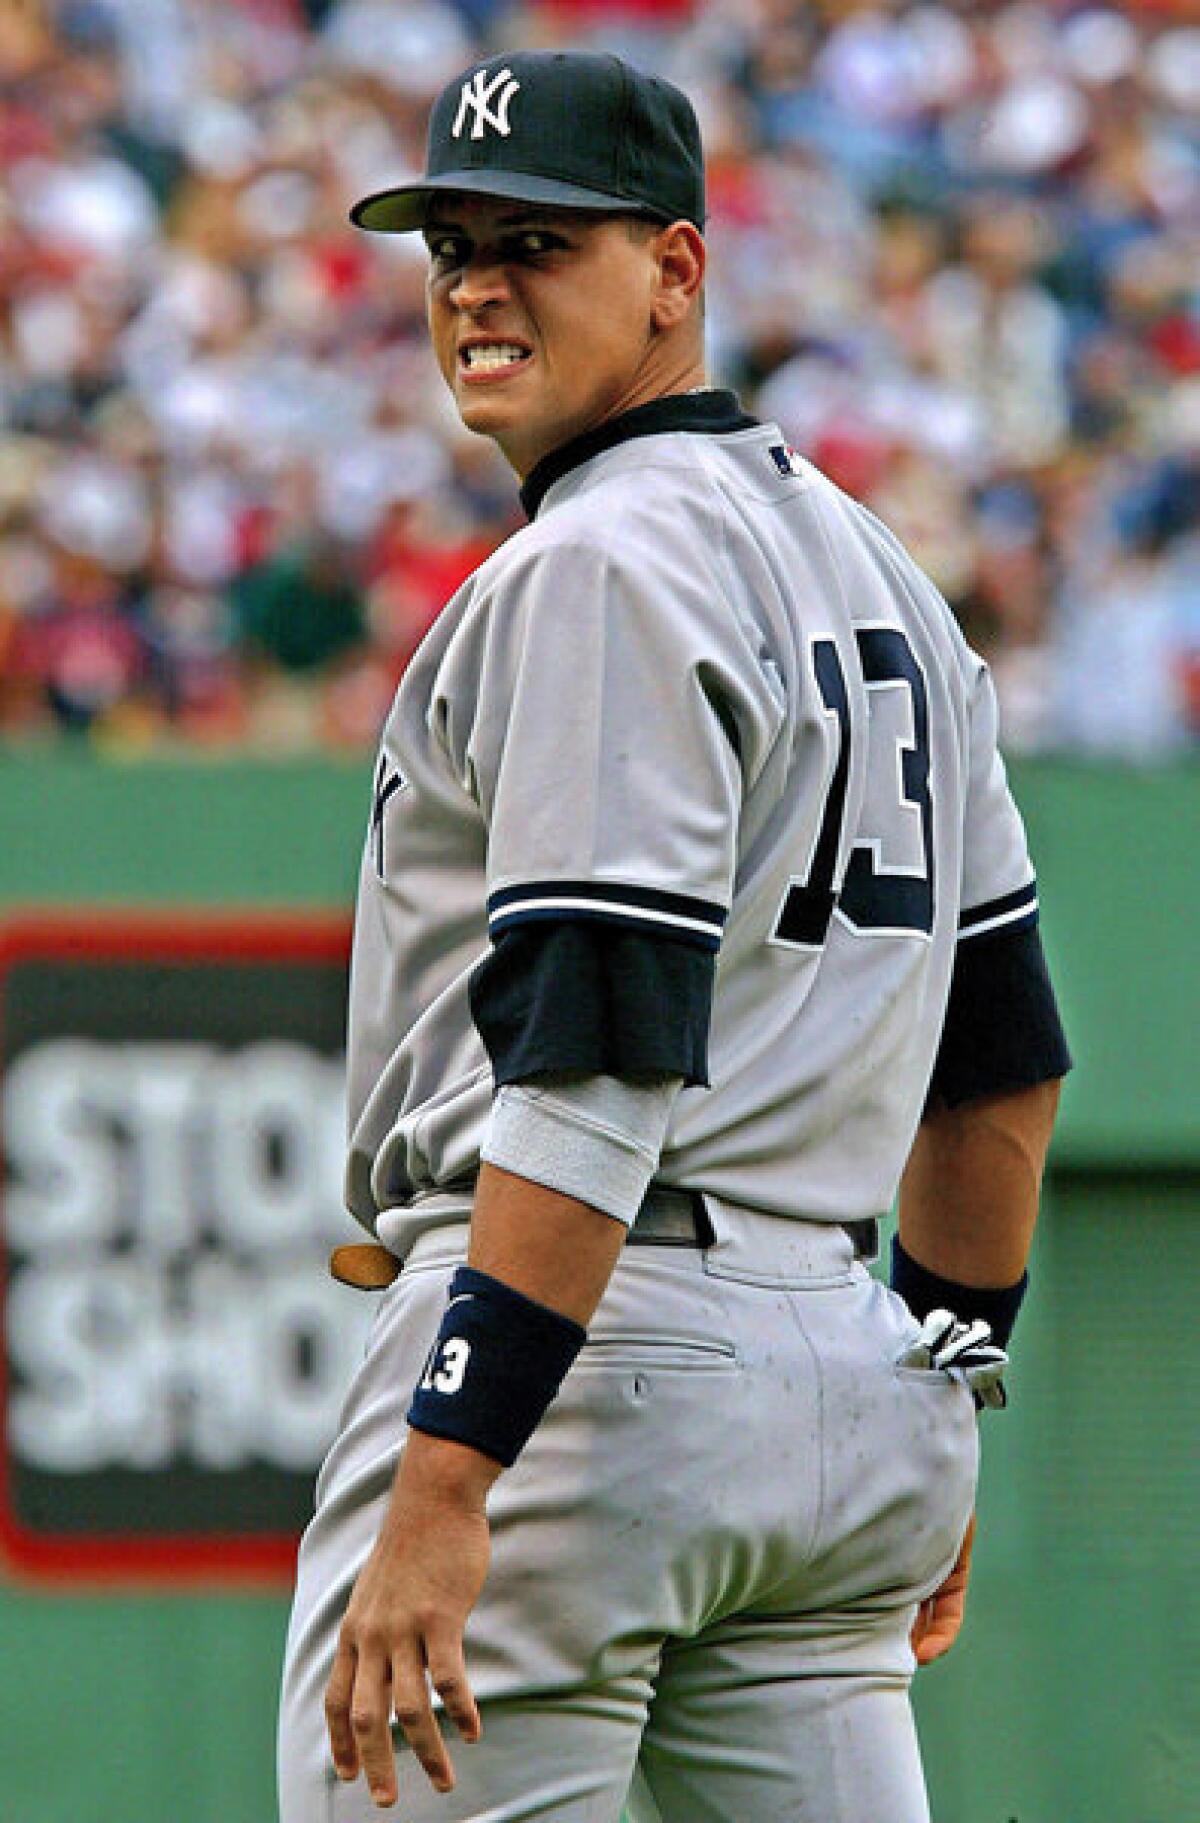 Alex Rodriguez plays with the Yankees during a game at Fenway Park in Boston.